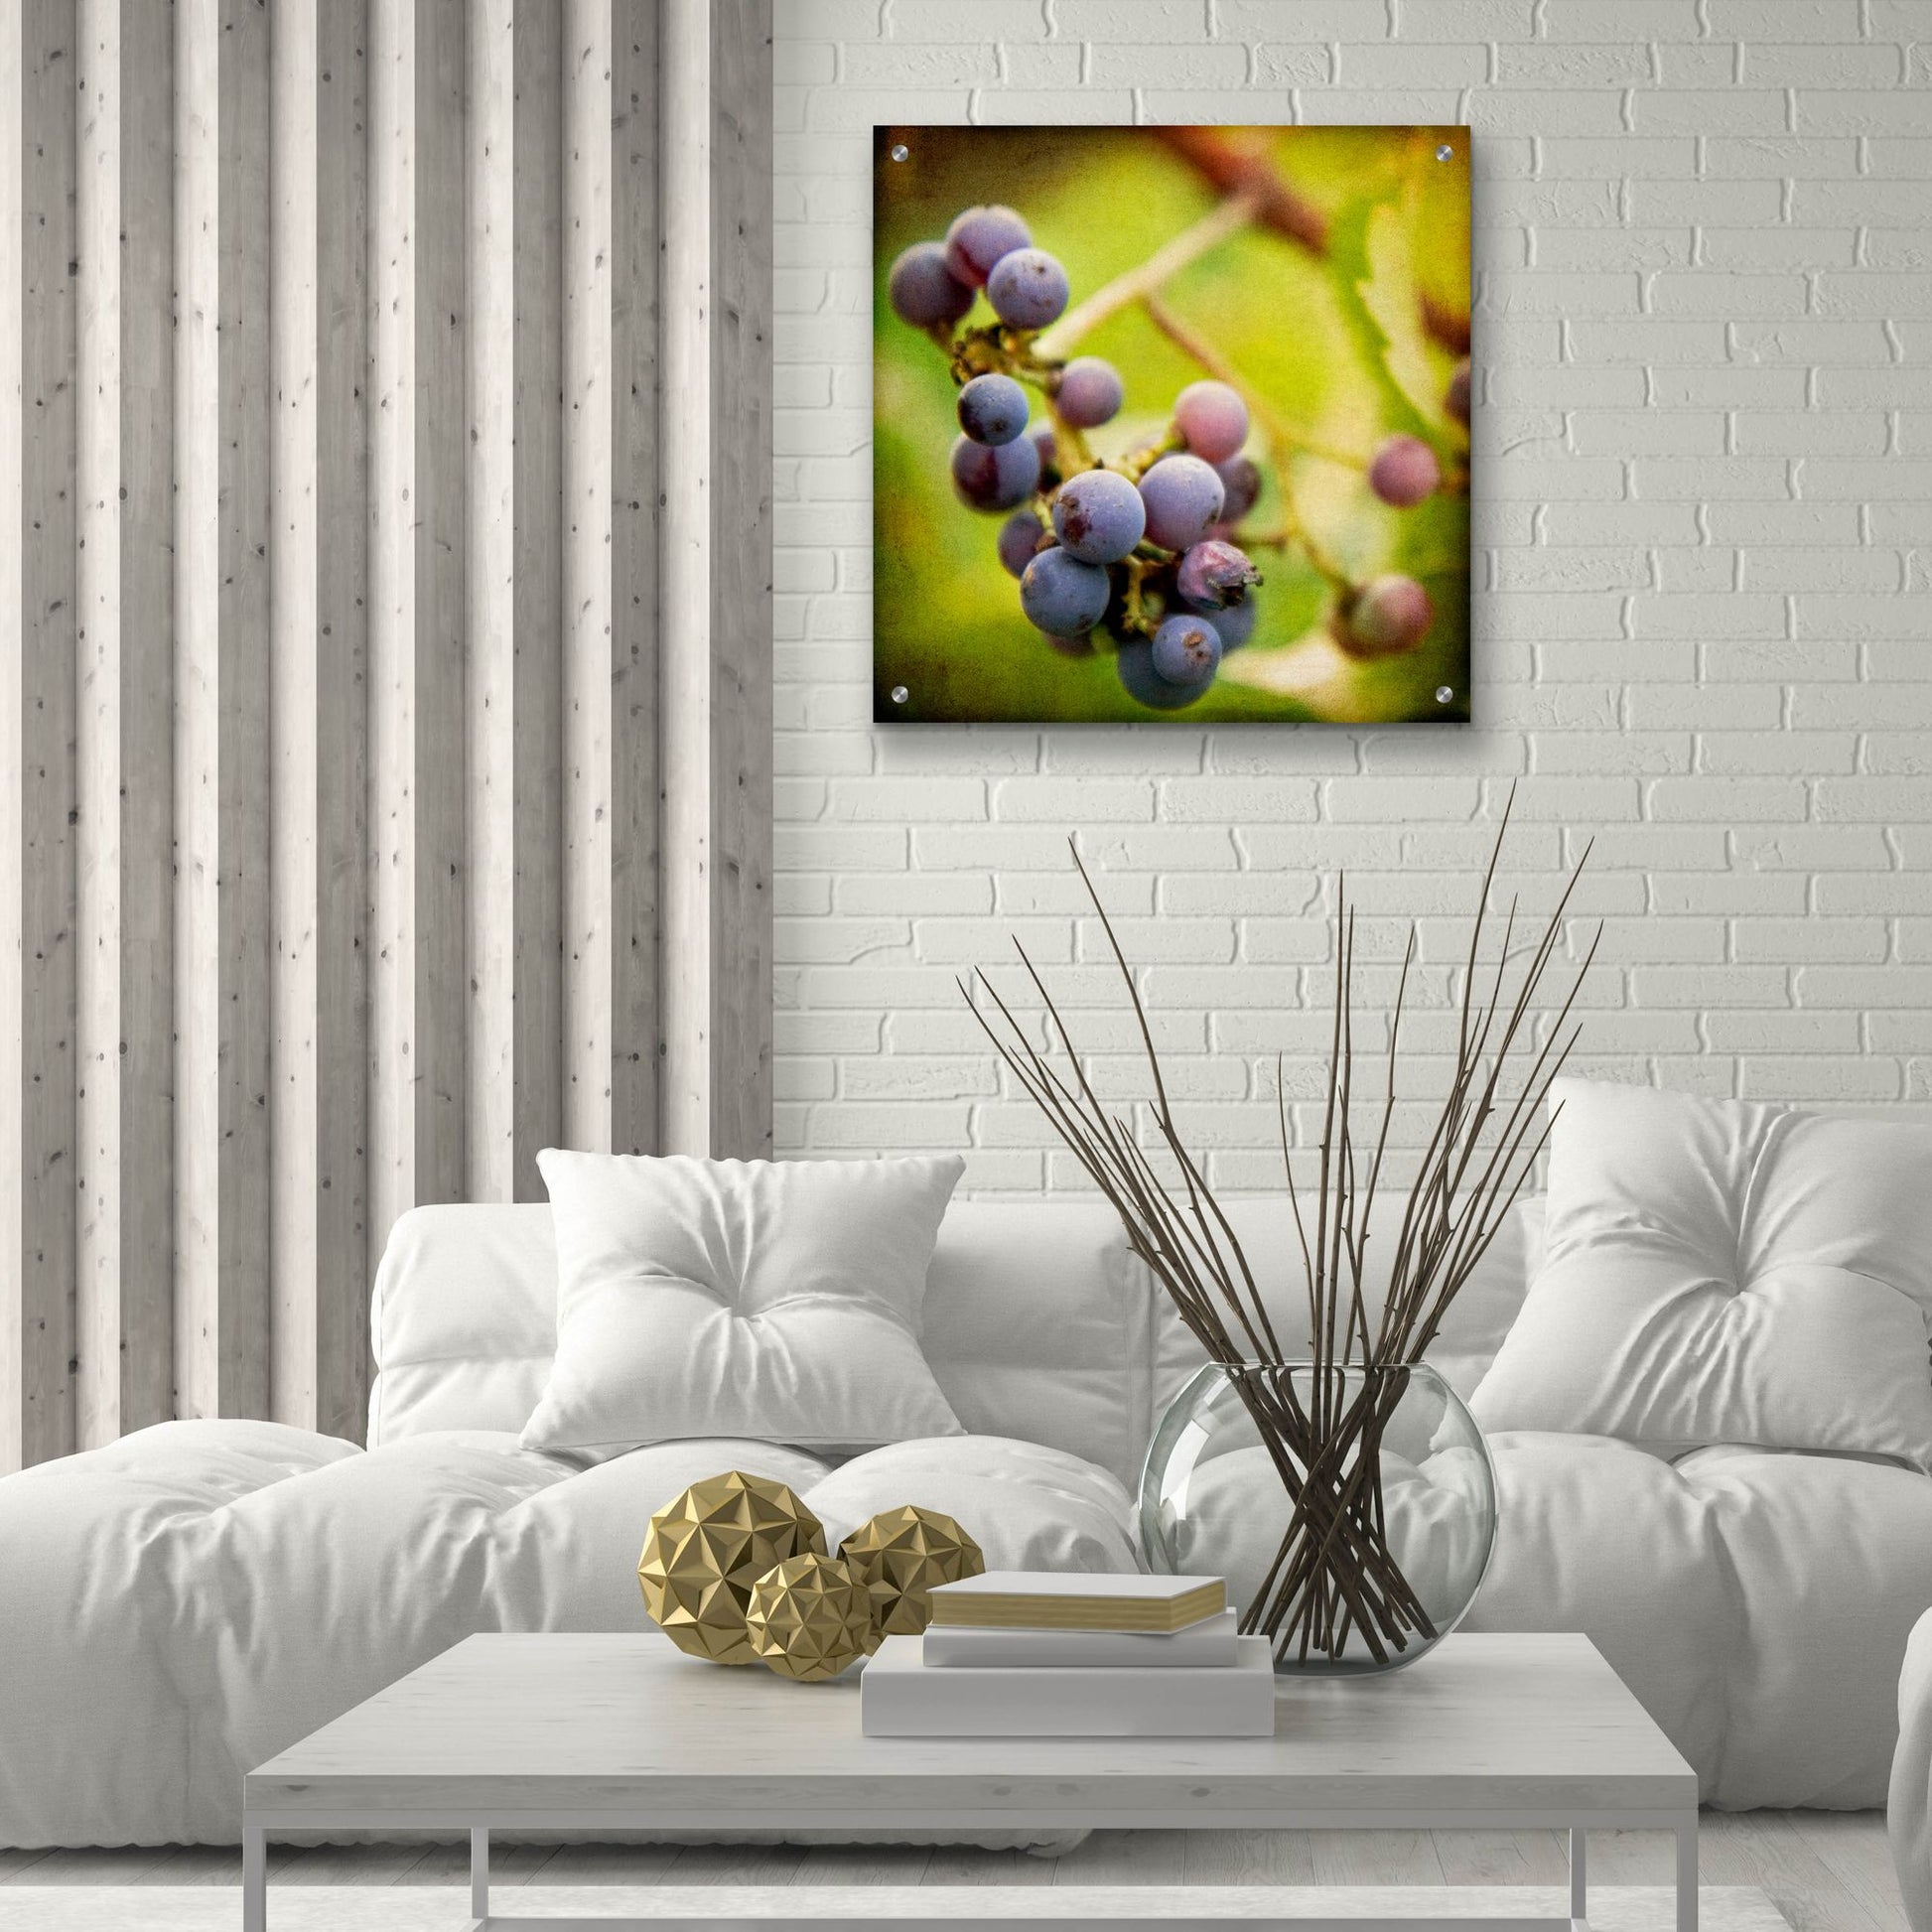 Epic Art 'Awaiting Harvest' by Jessica Rogers, Acrylic Glass Wall Art,24x24